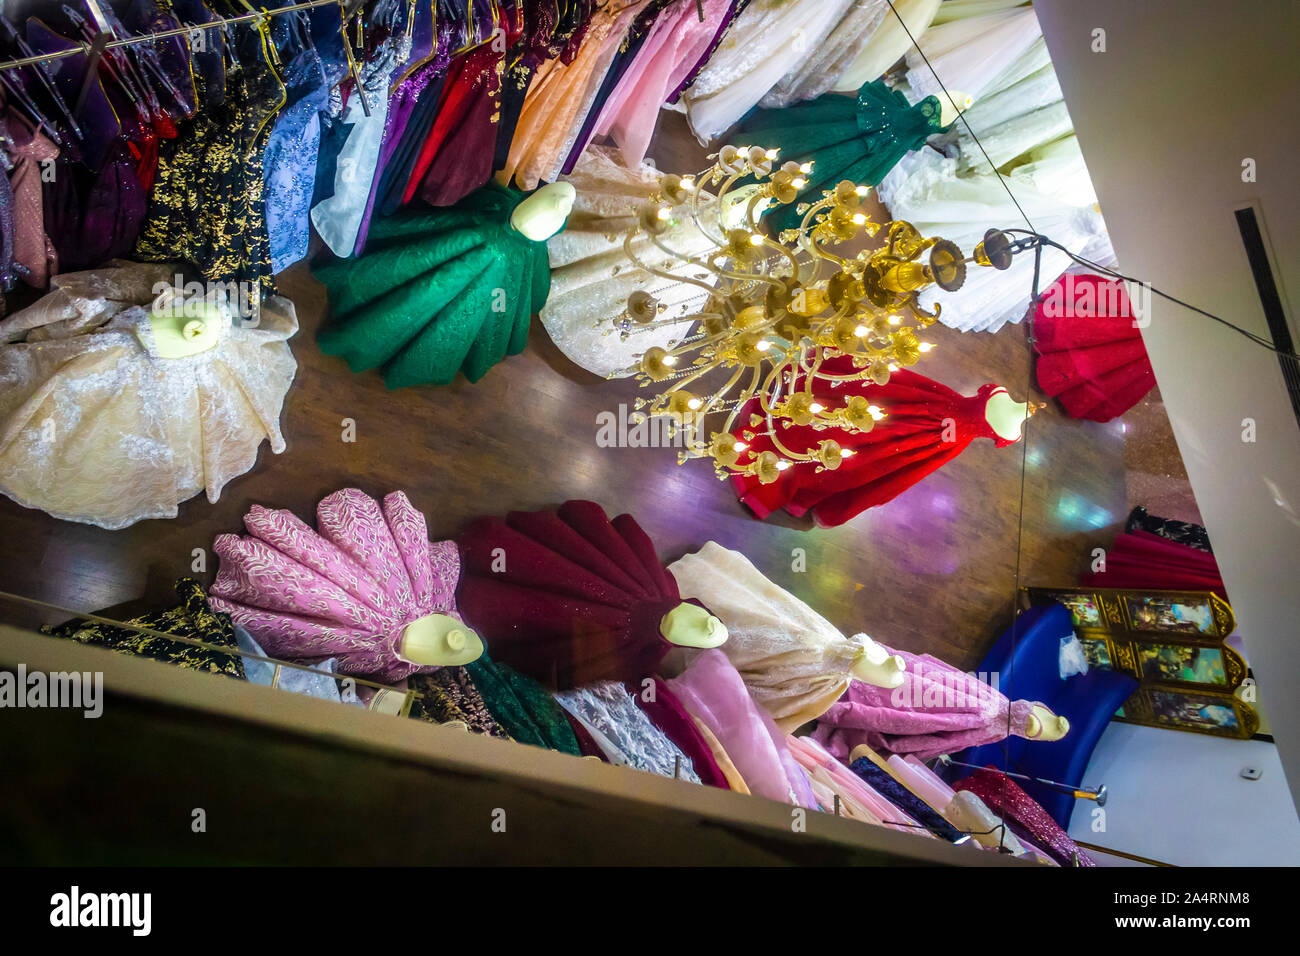 Department of dresses in the women's clothing store. Stock Photo